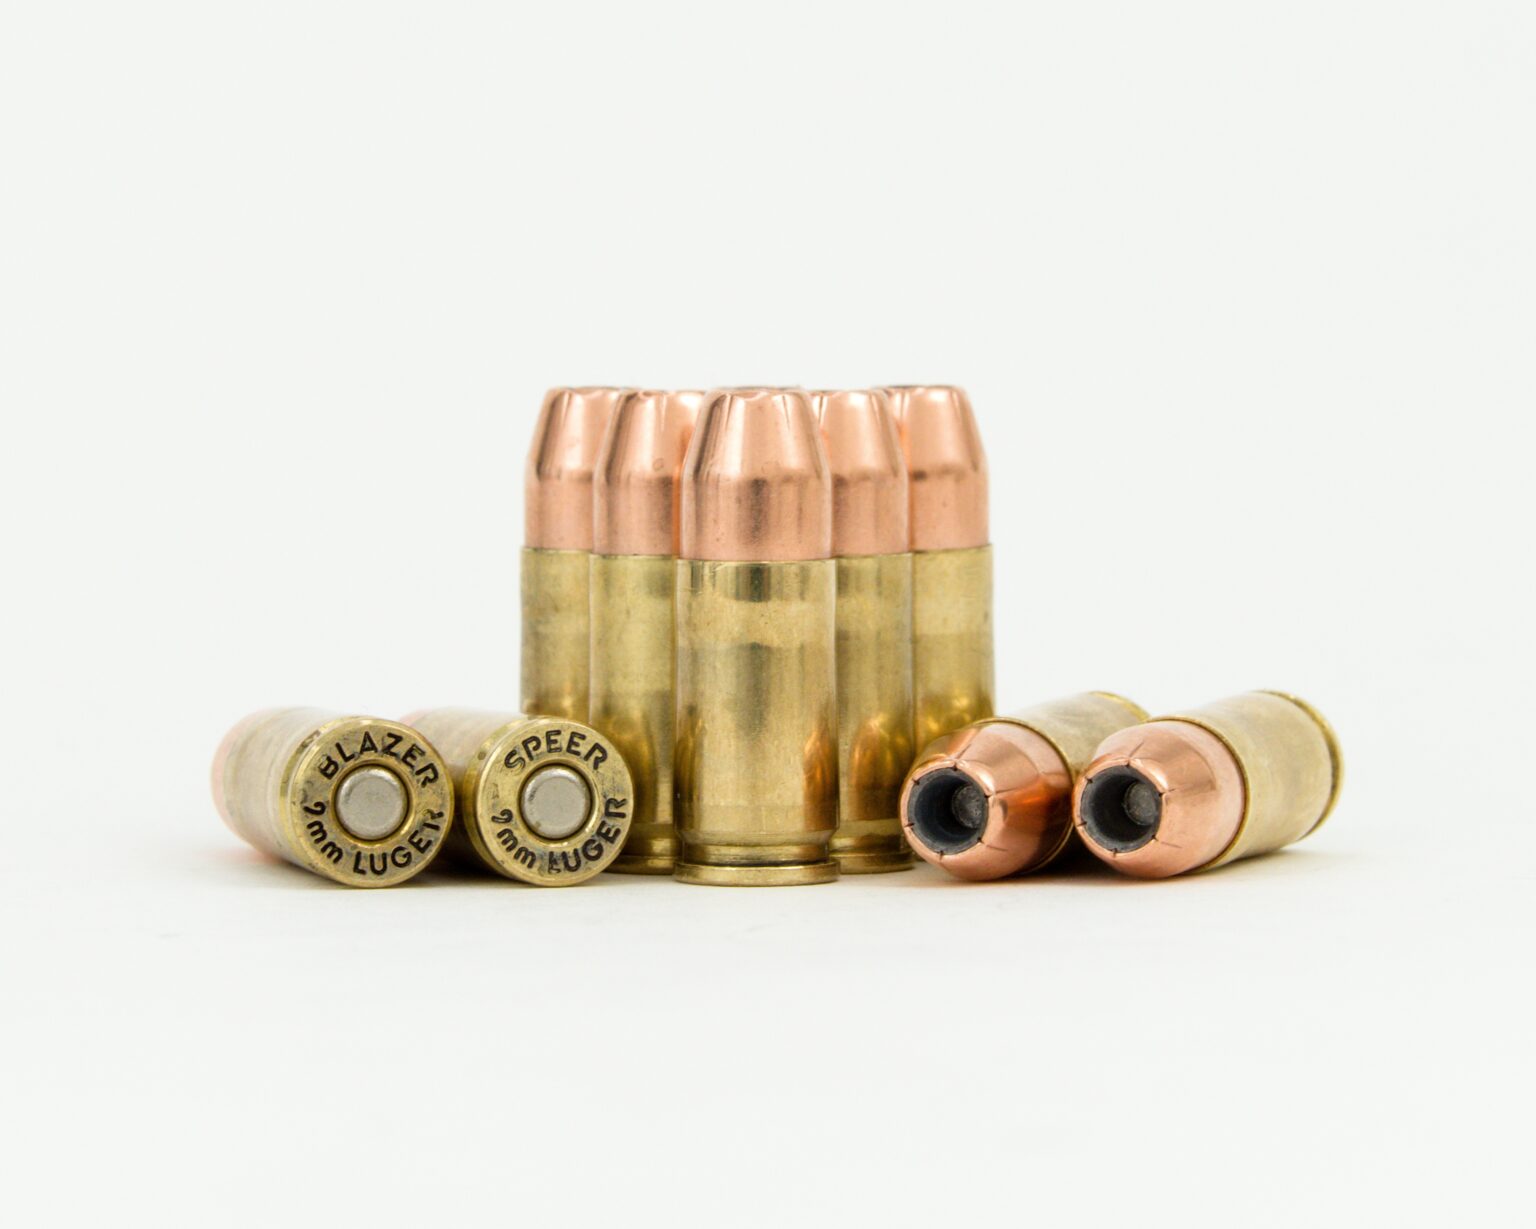 9mm Luger Personal Defense Ammunition with 115 Grain Sierra Sports ...